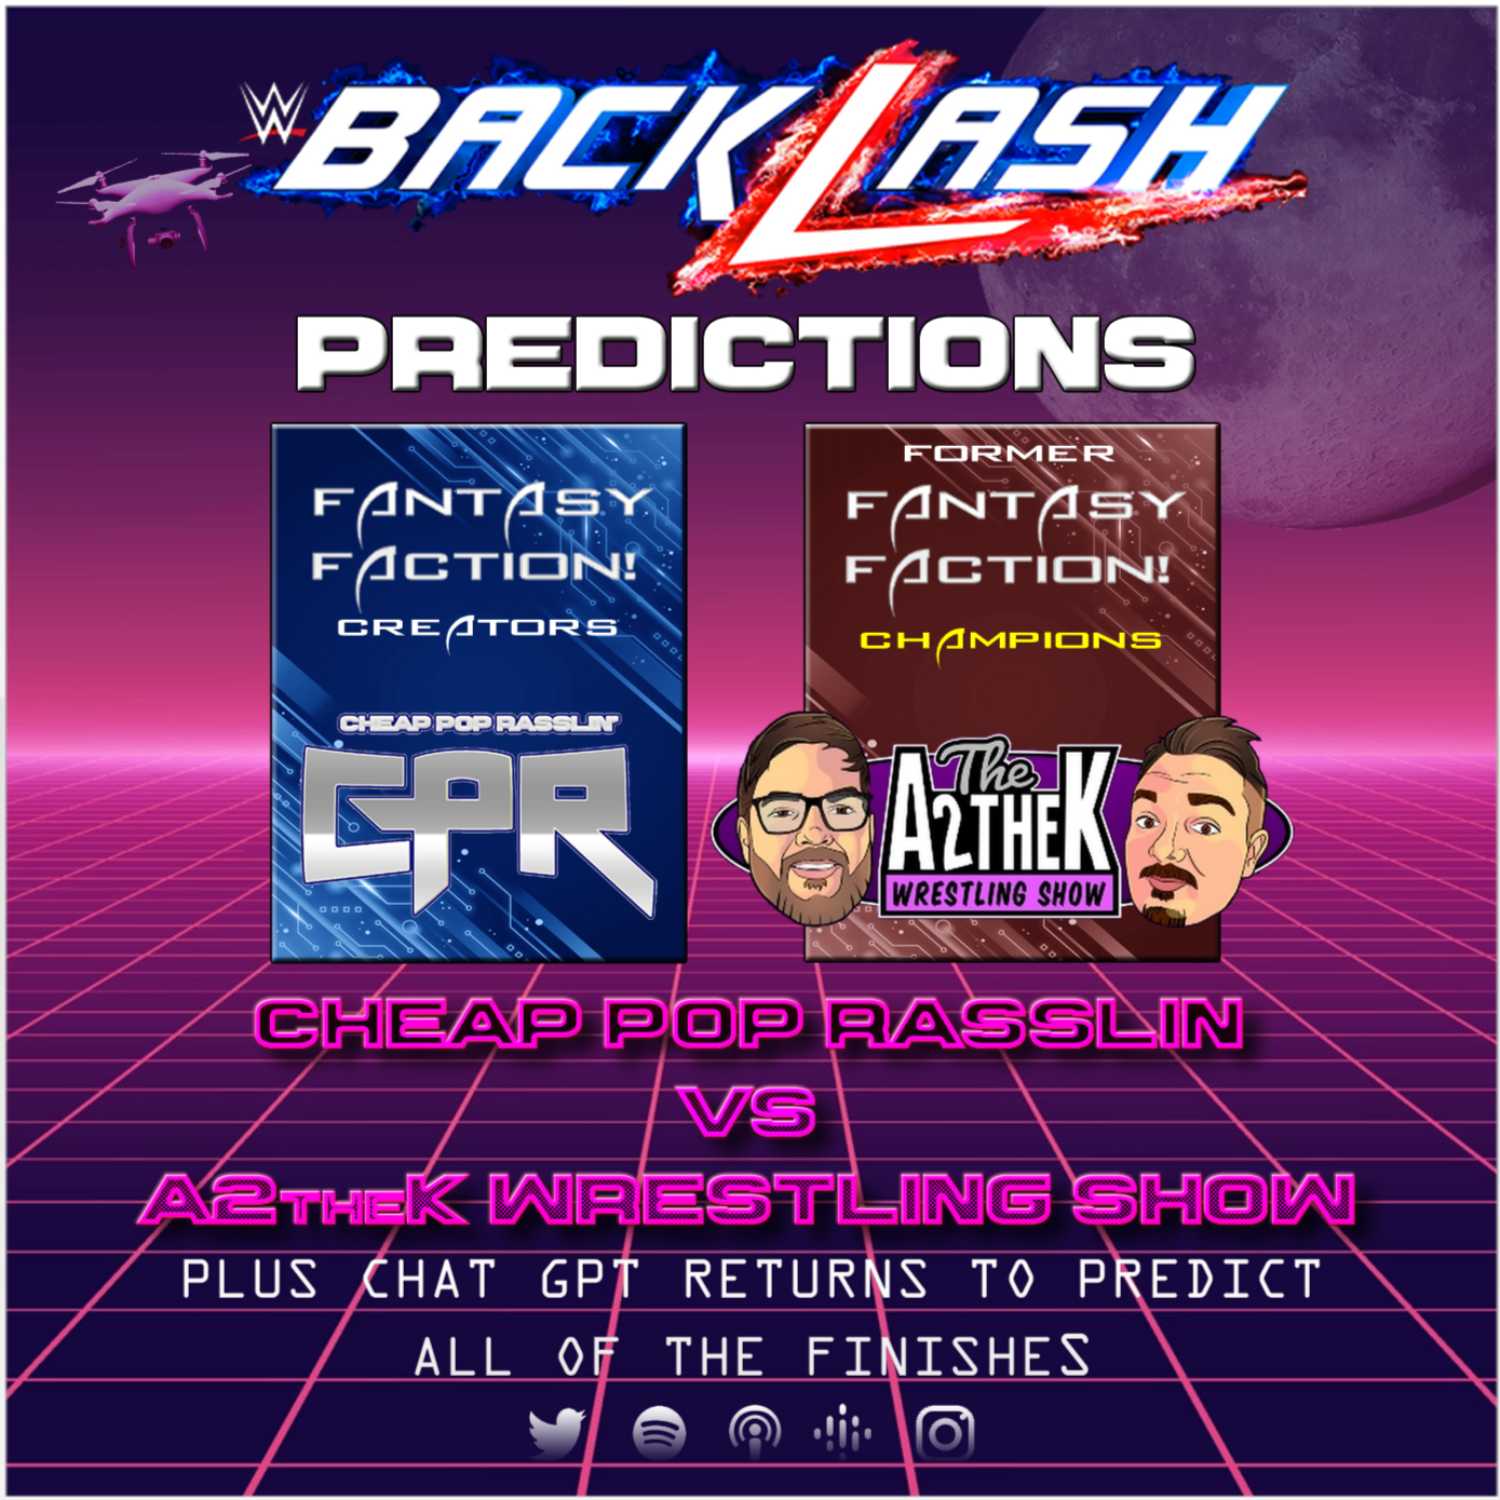 WWE Backlash Predictions (featuring THE A2theK WRESTLING SHOW!)